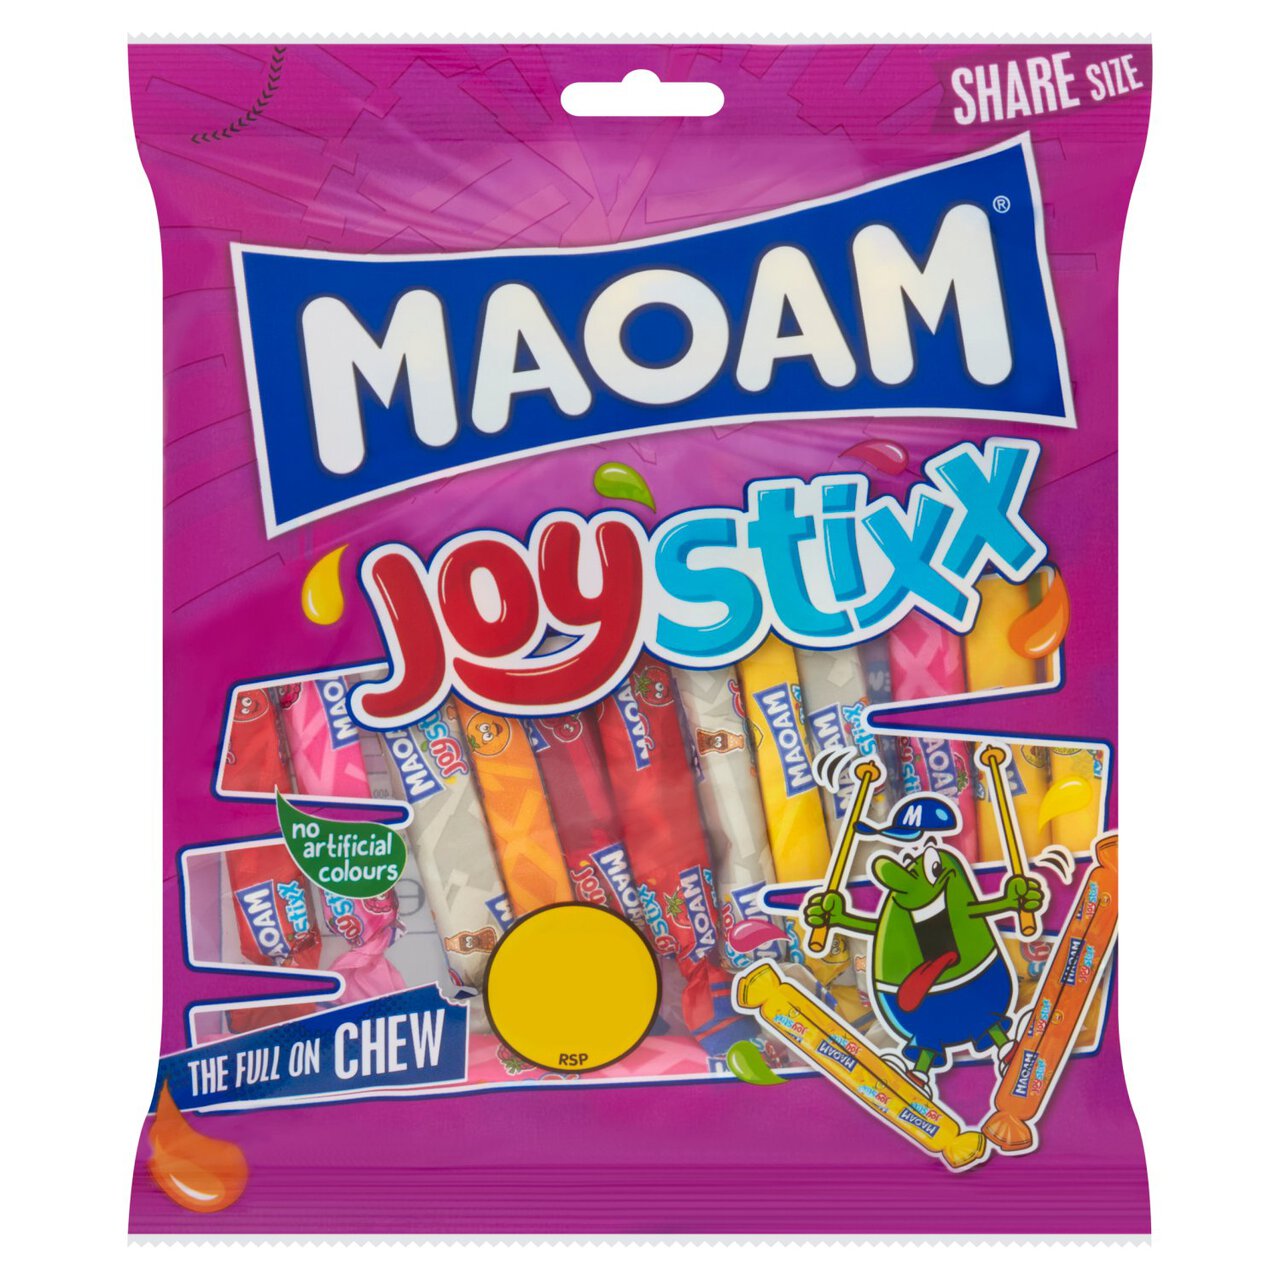 Maoam Joystixx Chewy Wrapped Sweets Sharing Bag 140g 140g